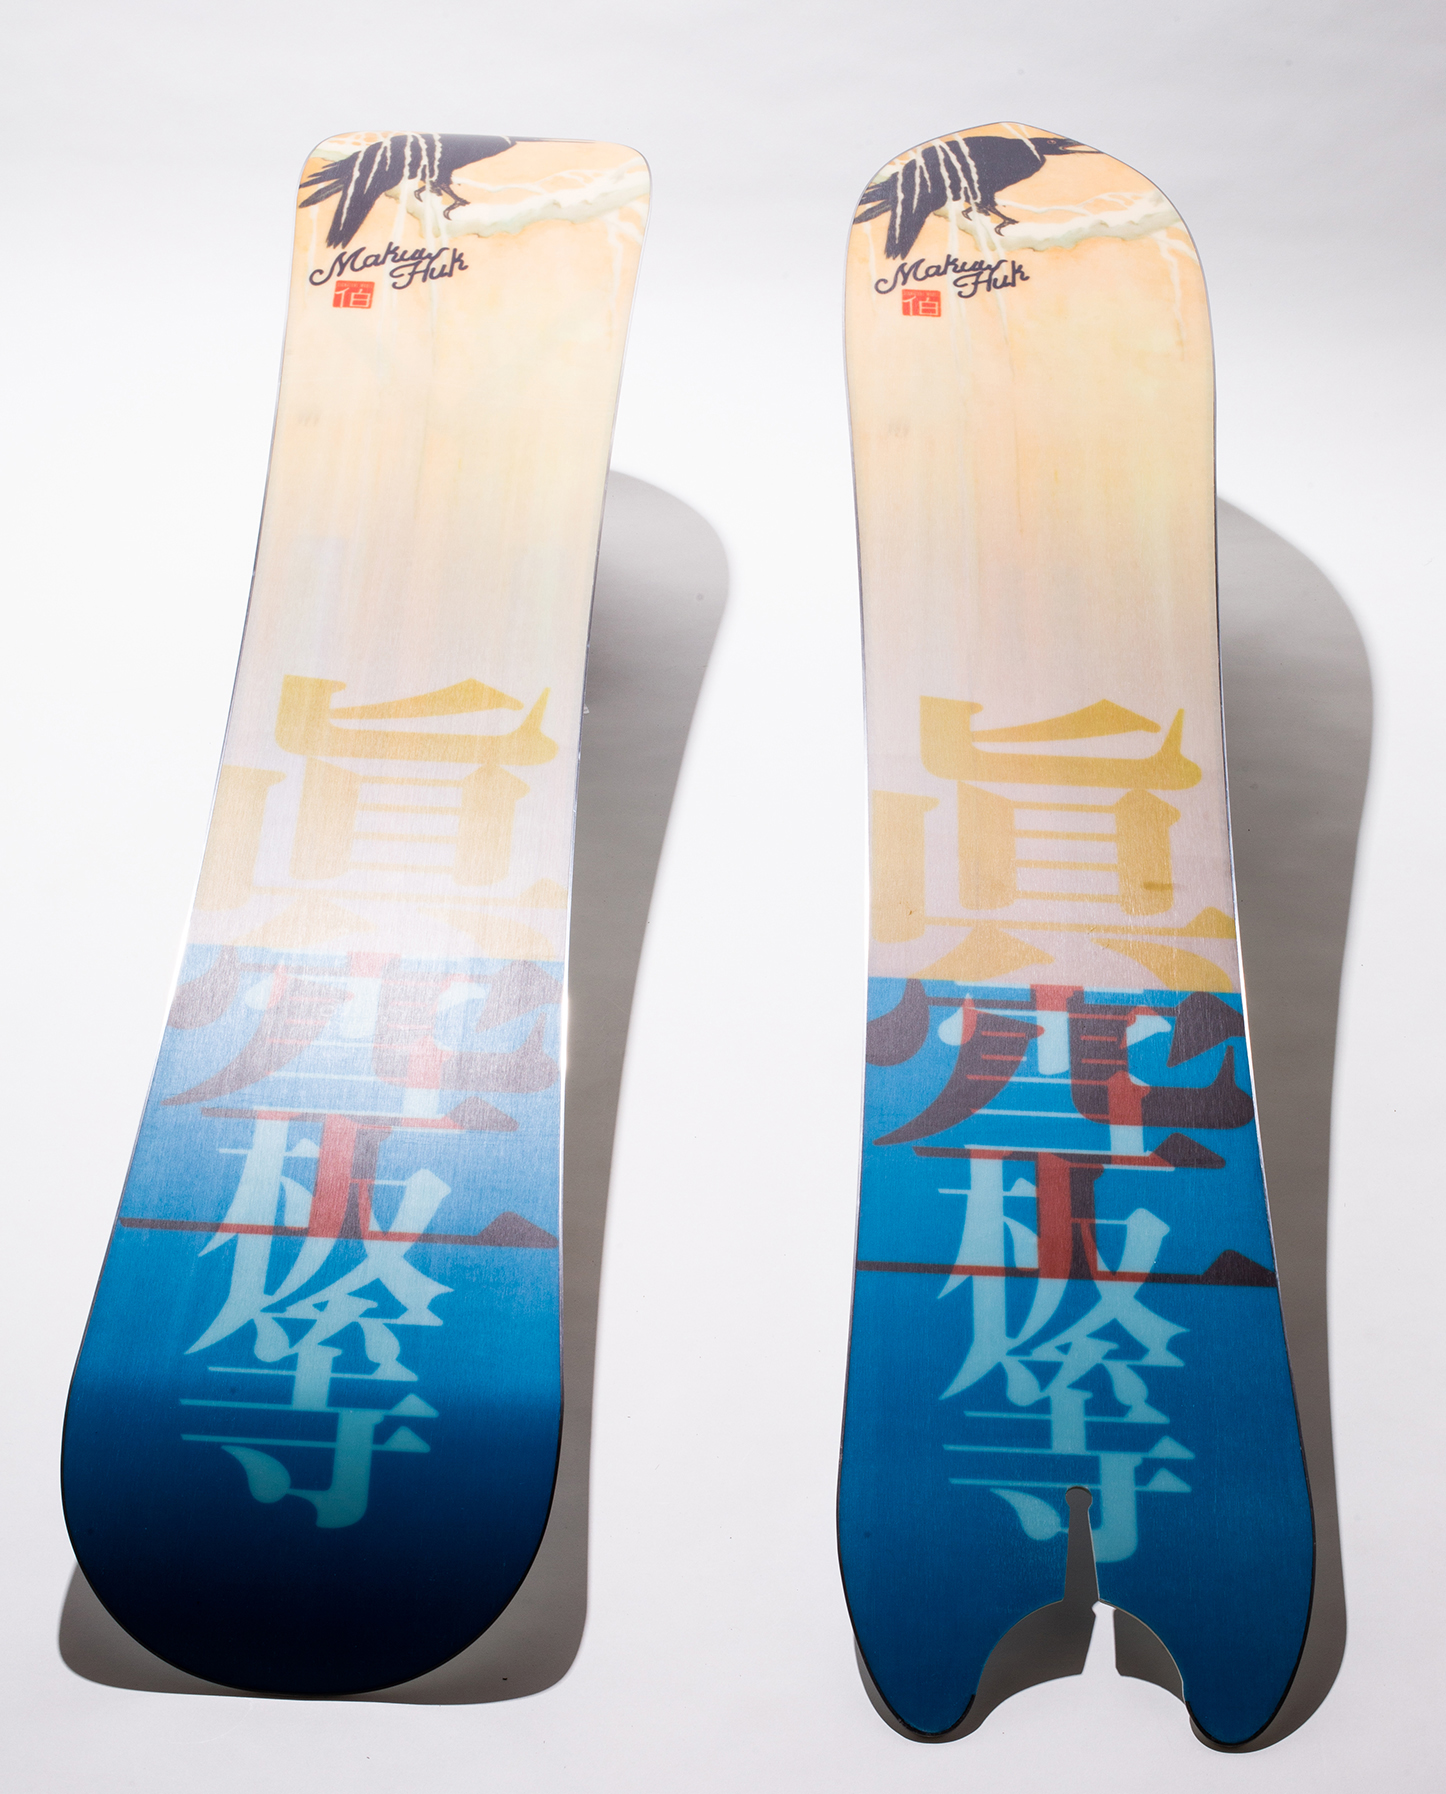 HUK (left) and HUK BC (right) have Japanese patterns for the graphics this season as well, but the Japanese patterns that Haku likes are used for the graphics, but the top sheet is chrysanthemum instead of the Japanese carving taste that was used until last season. The petals and the crows on the sole are drawn with a taste like an ink painting.